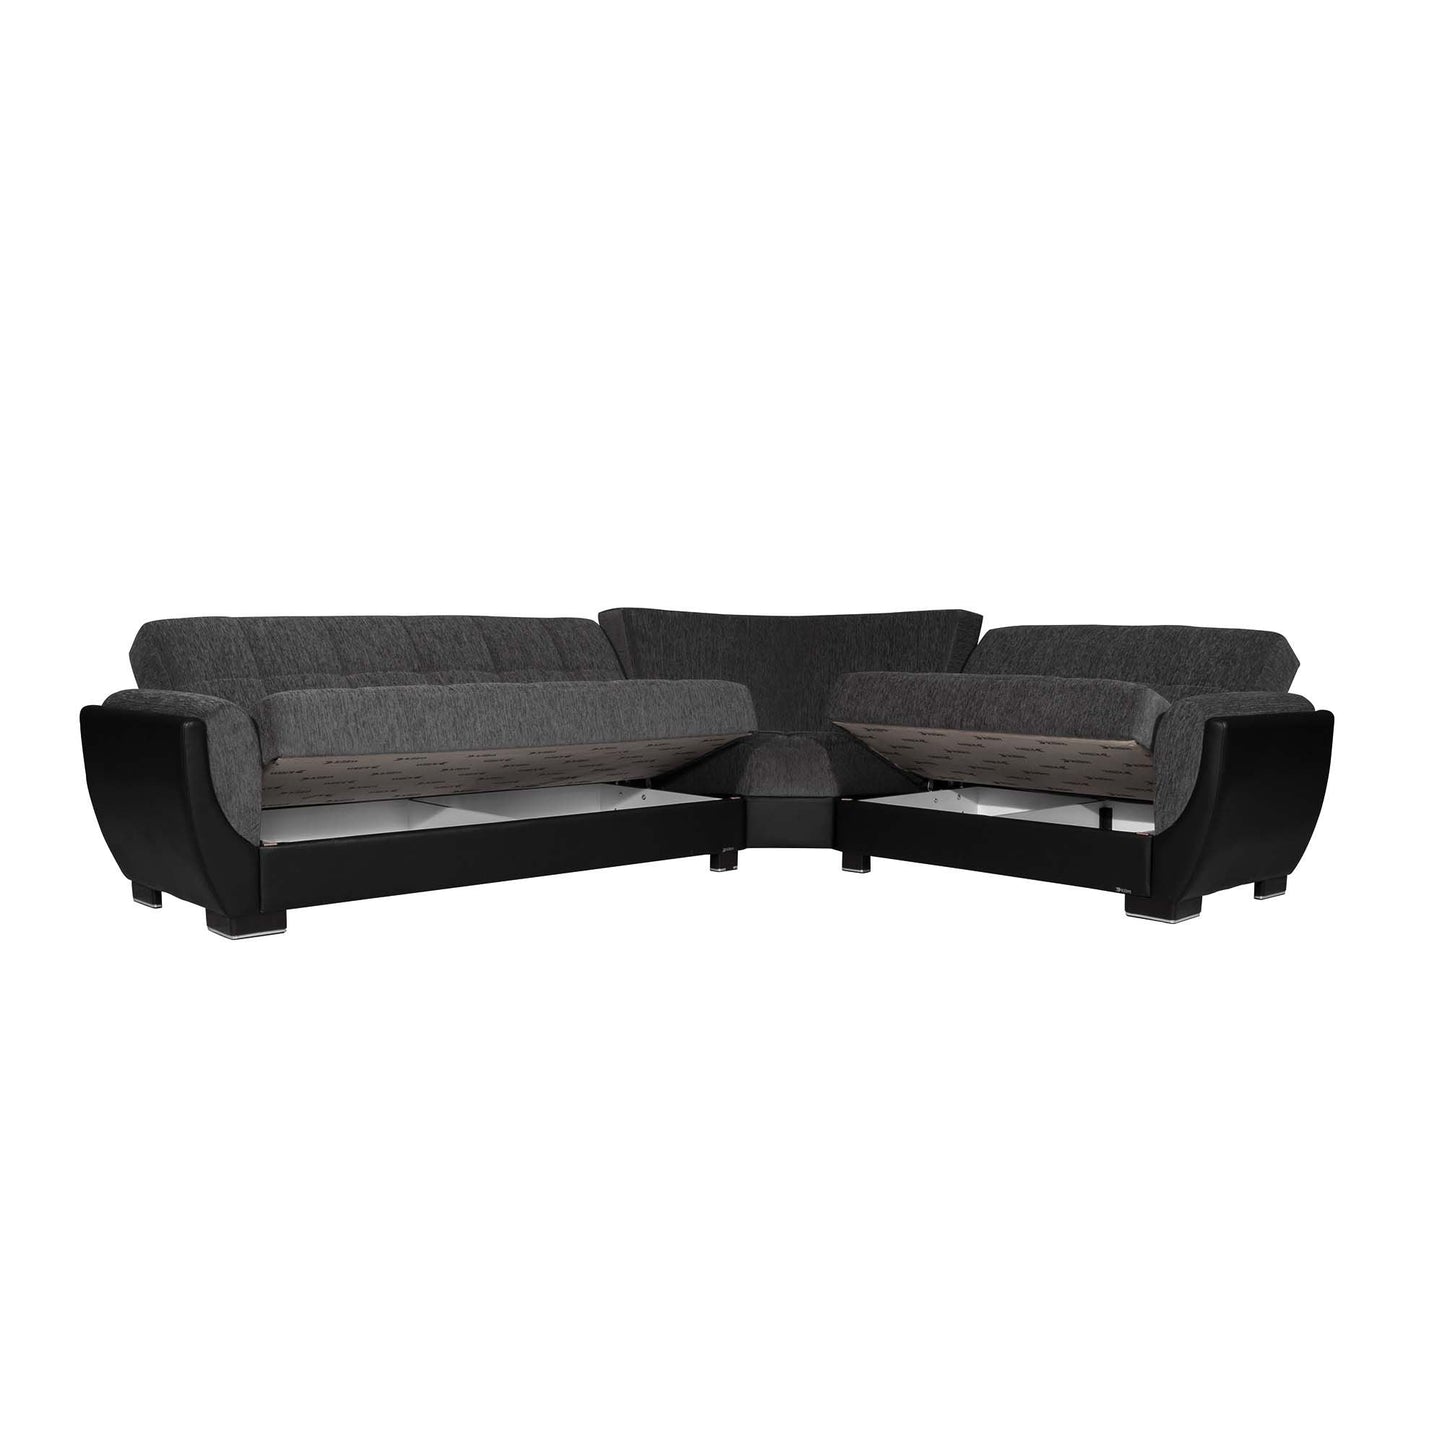 Armada Air Upholstered Convertible Sectional with Storage Grey/Black-PU Chenille